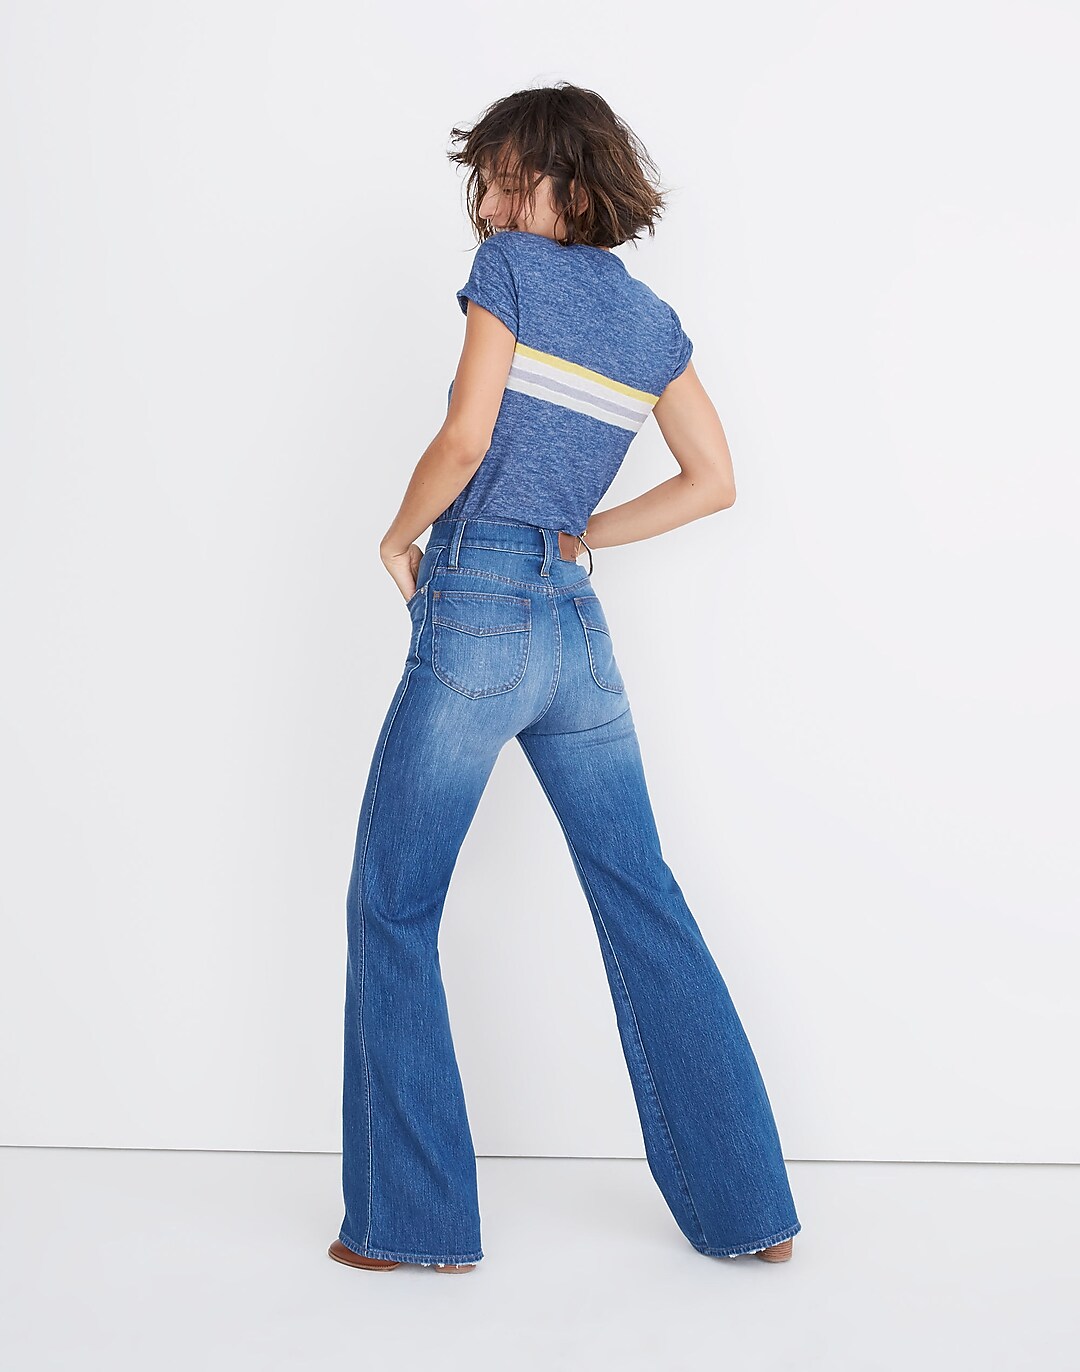  Ruffles Jeans Bell Pants Trousers Two Flare Denim